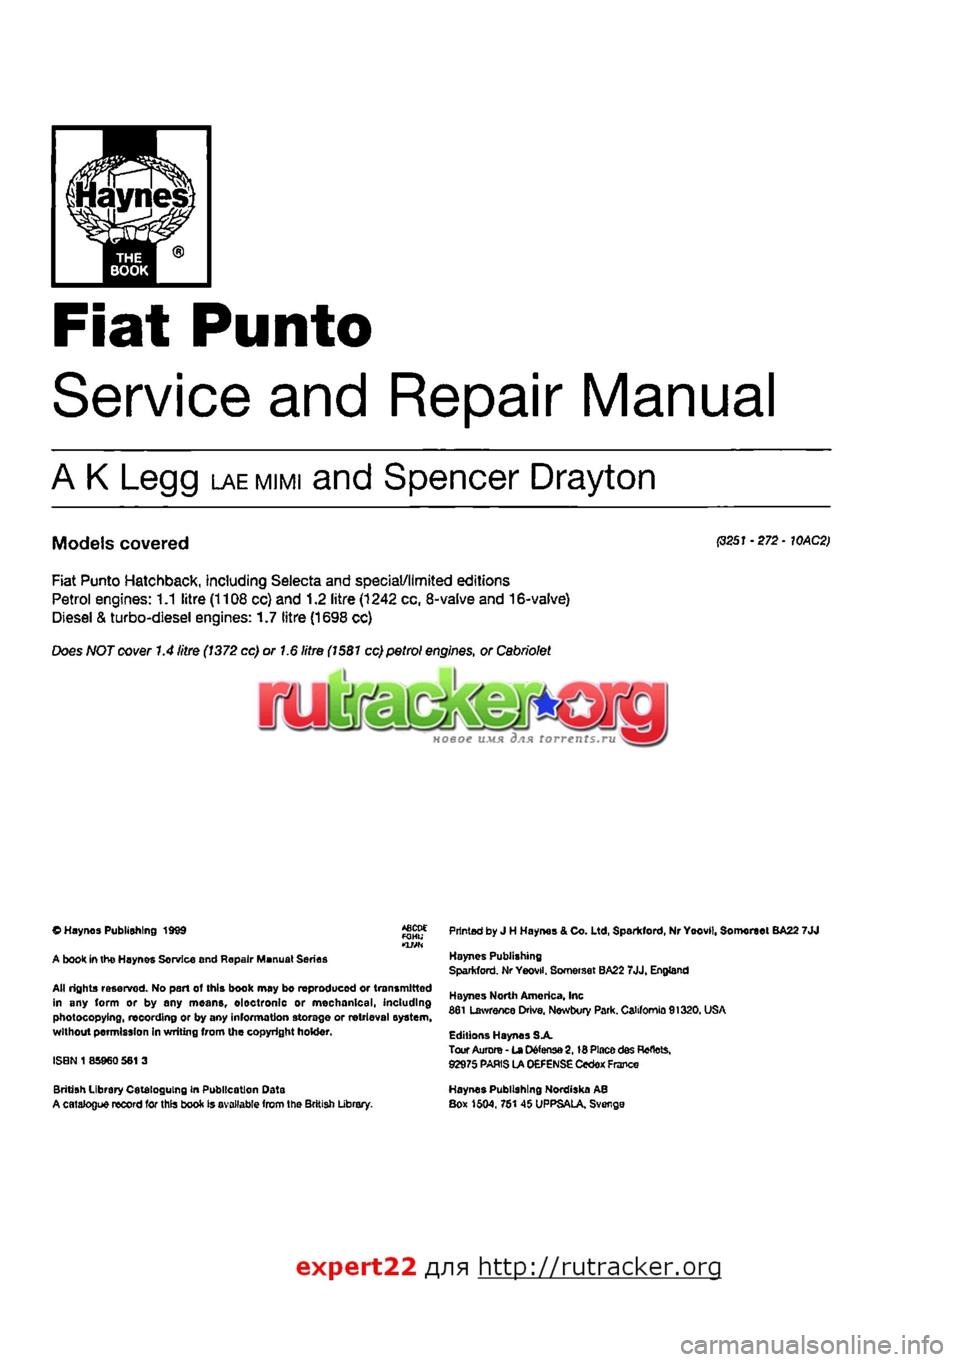 FIAT PUNTO 1997 176 / 1.G Workshop Manual 
Fiat Punto 
Service and Repair Manual 
A K Legg LAEMIMI and Spencer Drayton 
Models covered P251 •272 • WAC2> 
Fiat Punto Hatchback, including Selecta and special/limited editions Petrol engines: